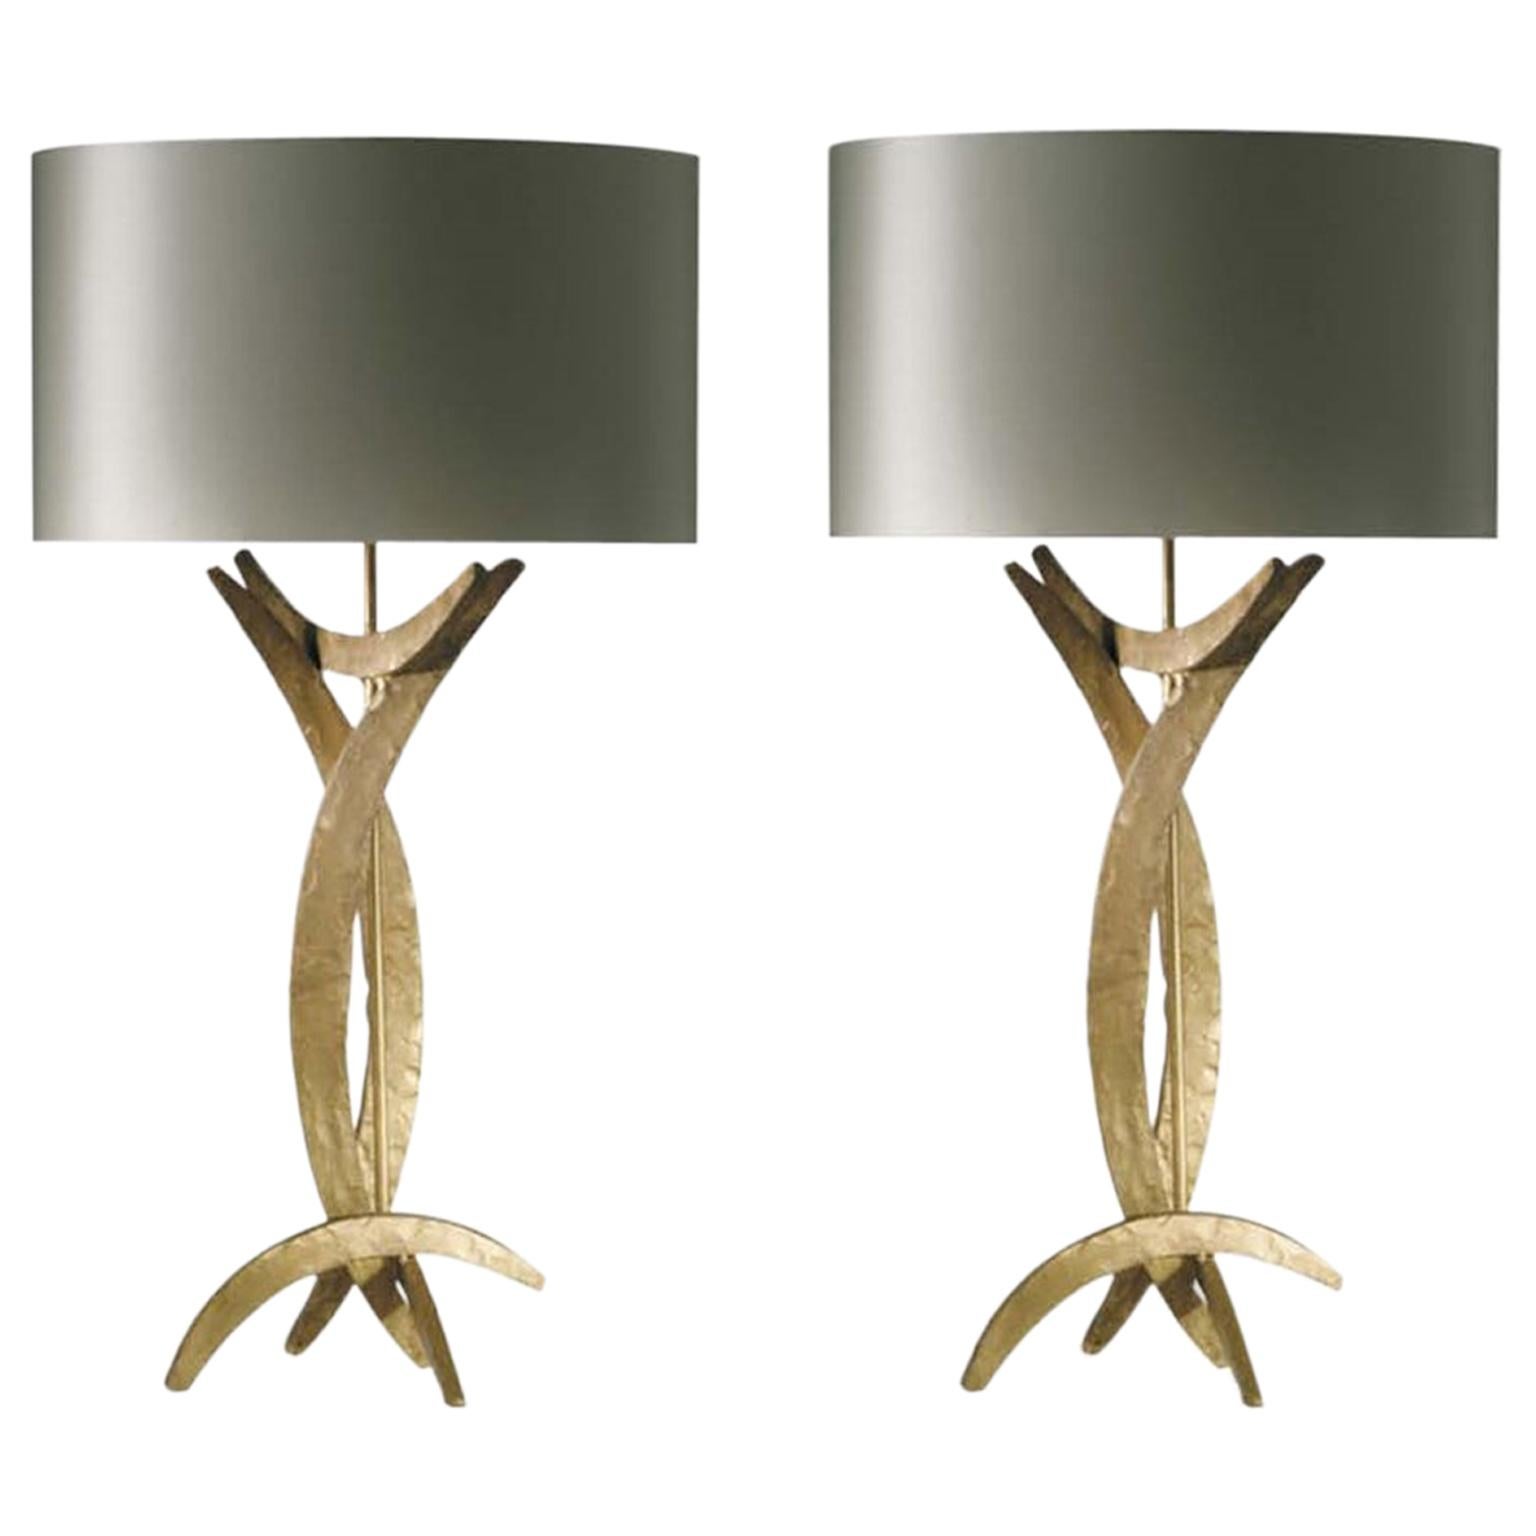 Bright Gold Finish Table Lamps, Metal Table Lamps With Shades